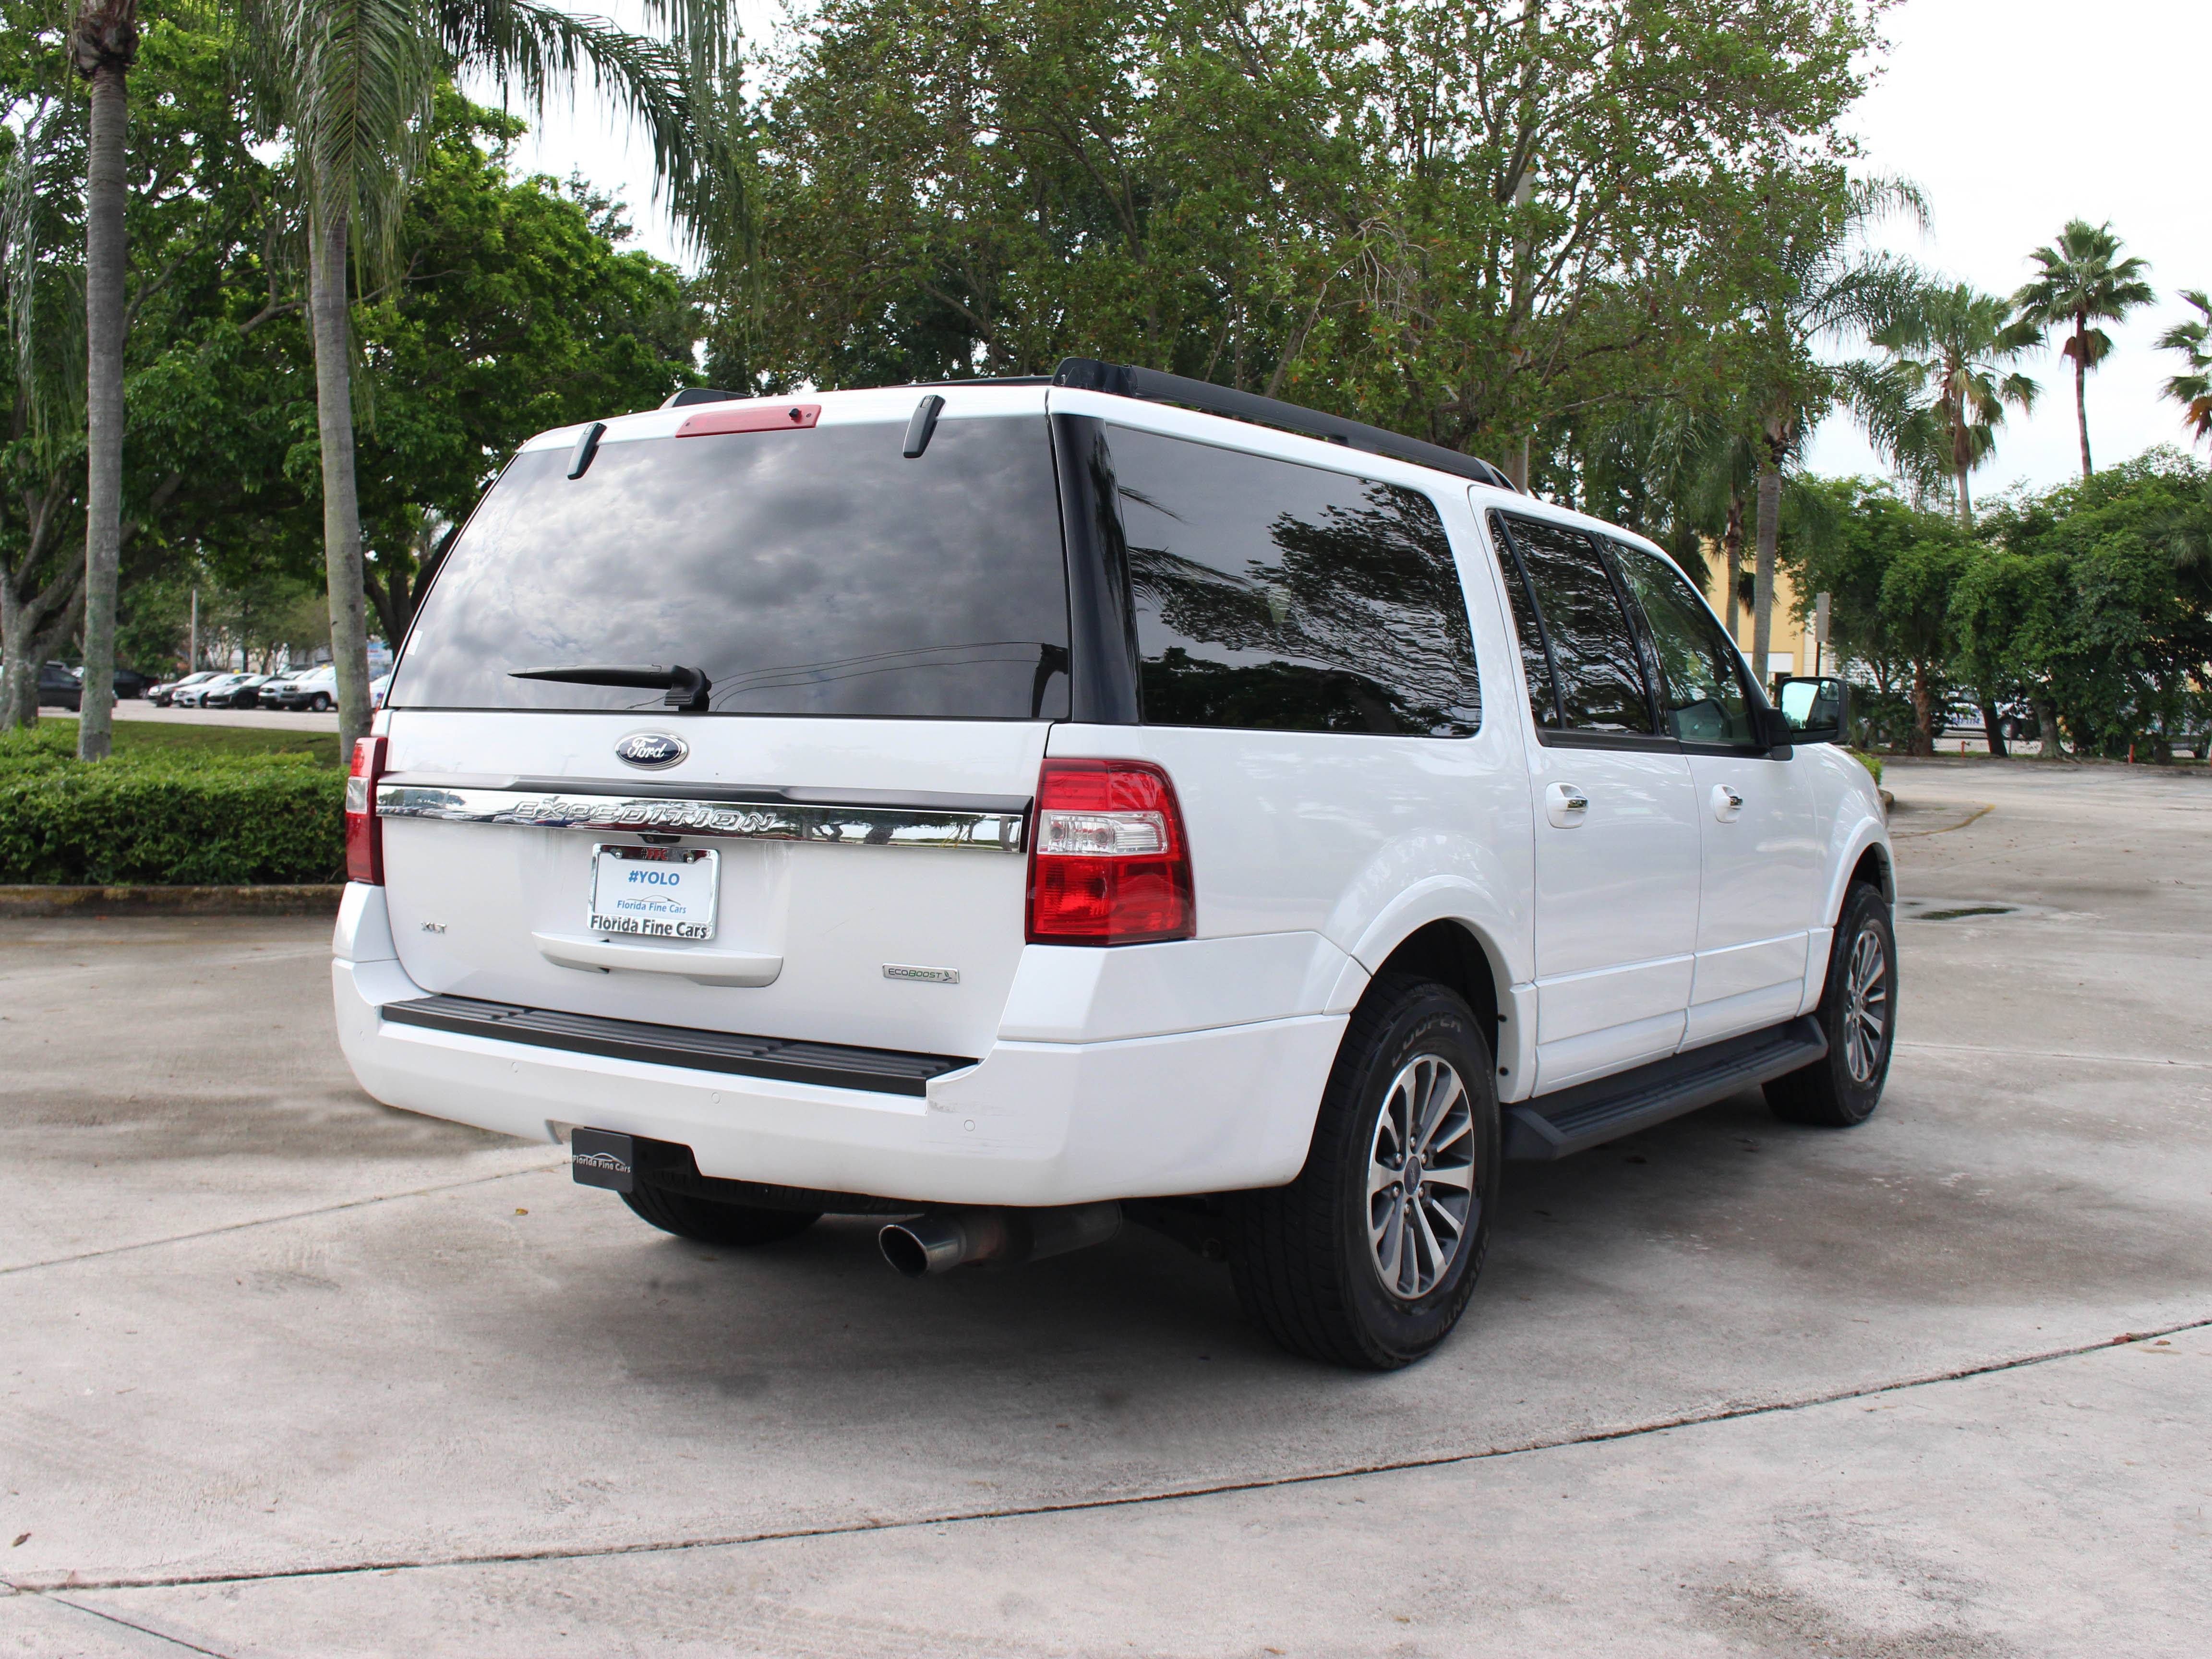 Florida Fine Cars - Used FORD EXPEDITION EL 2015 MARGATE Xlt